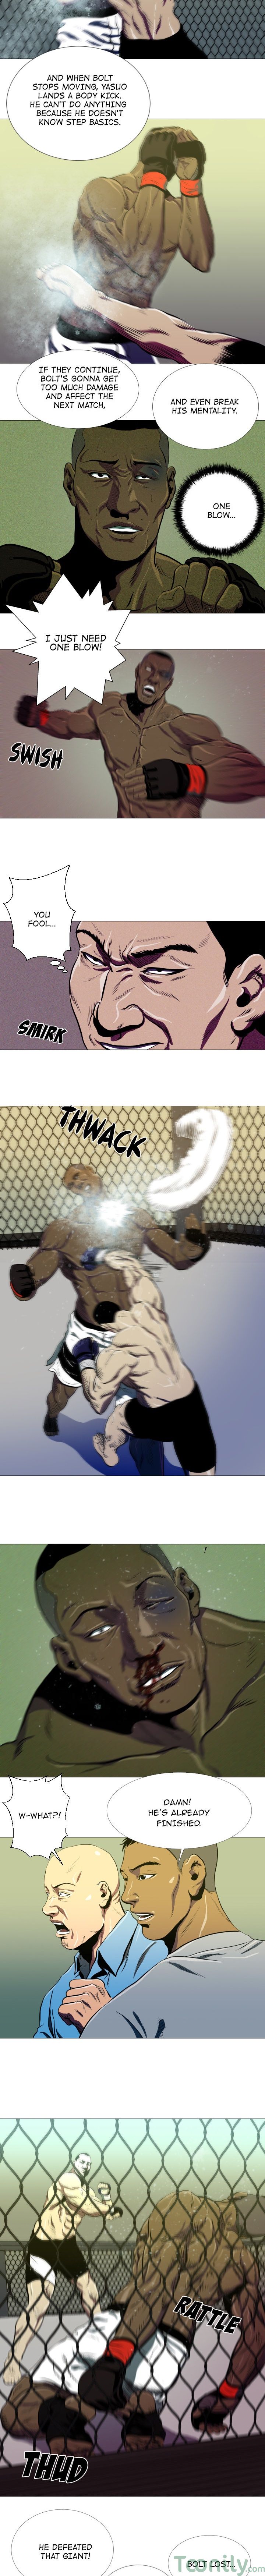 The Fighting Monster image